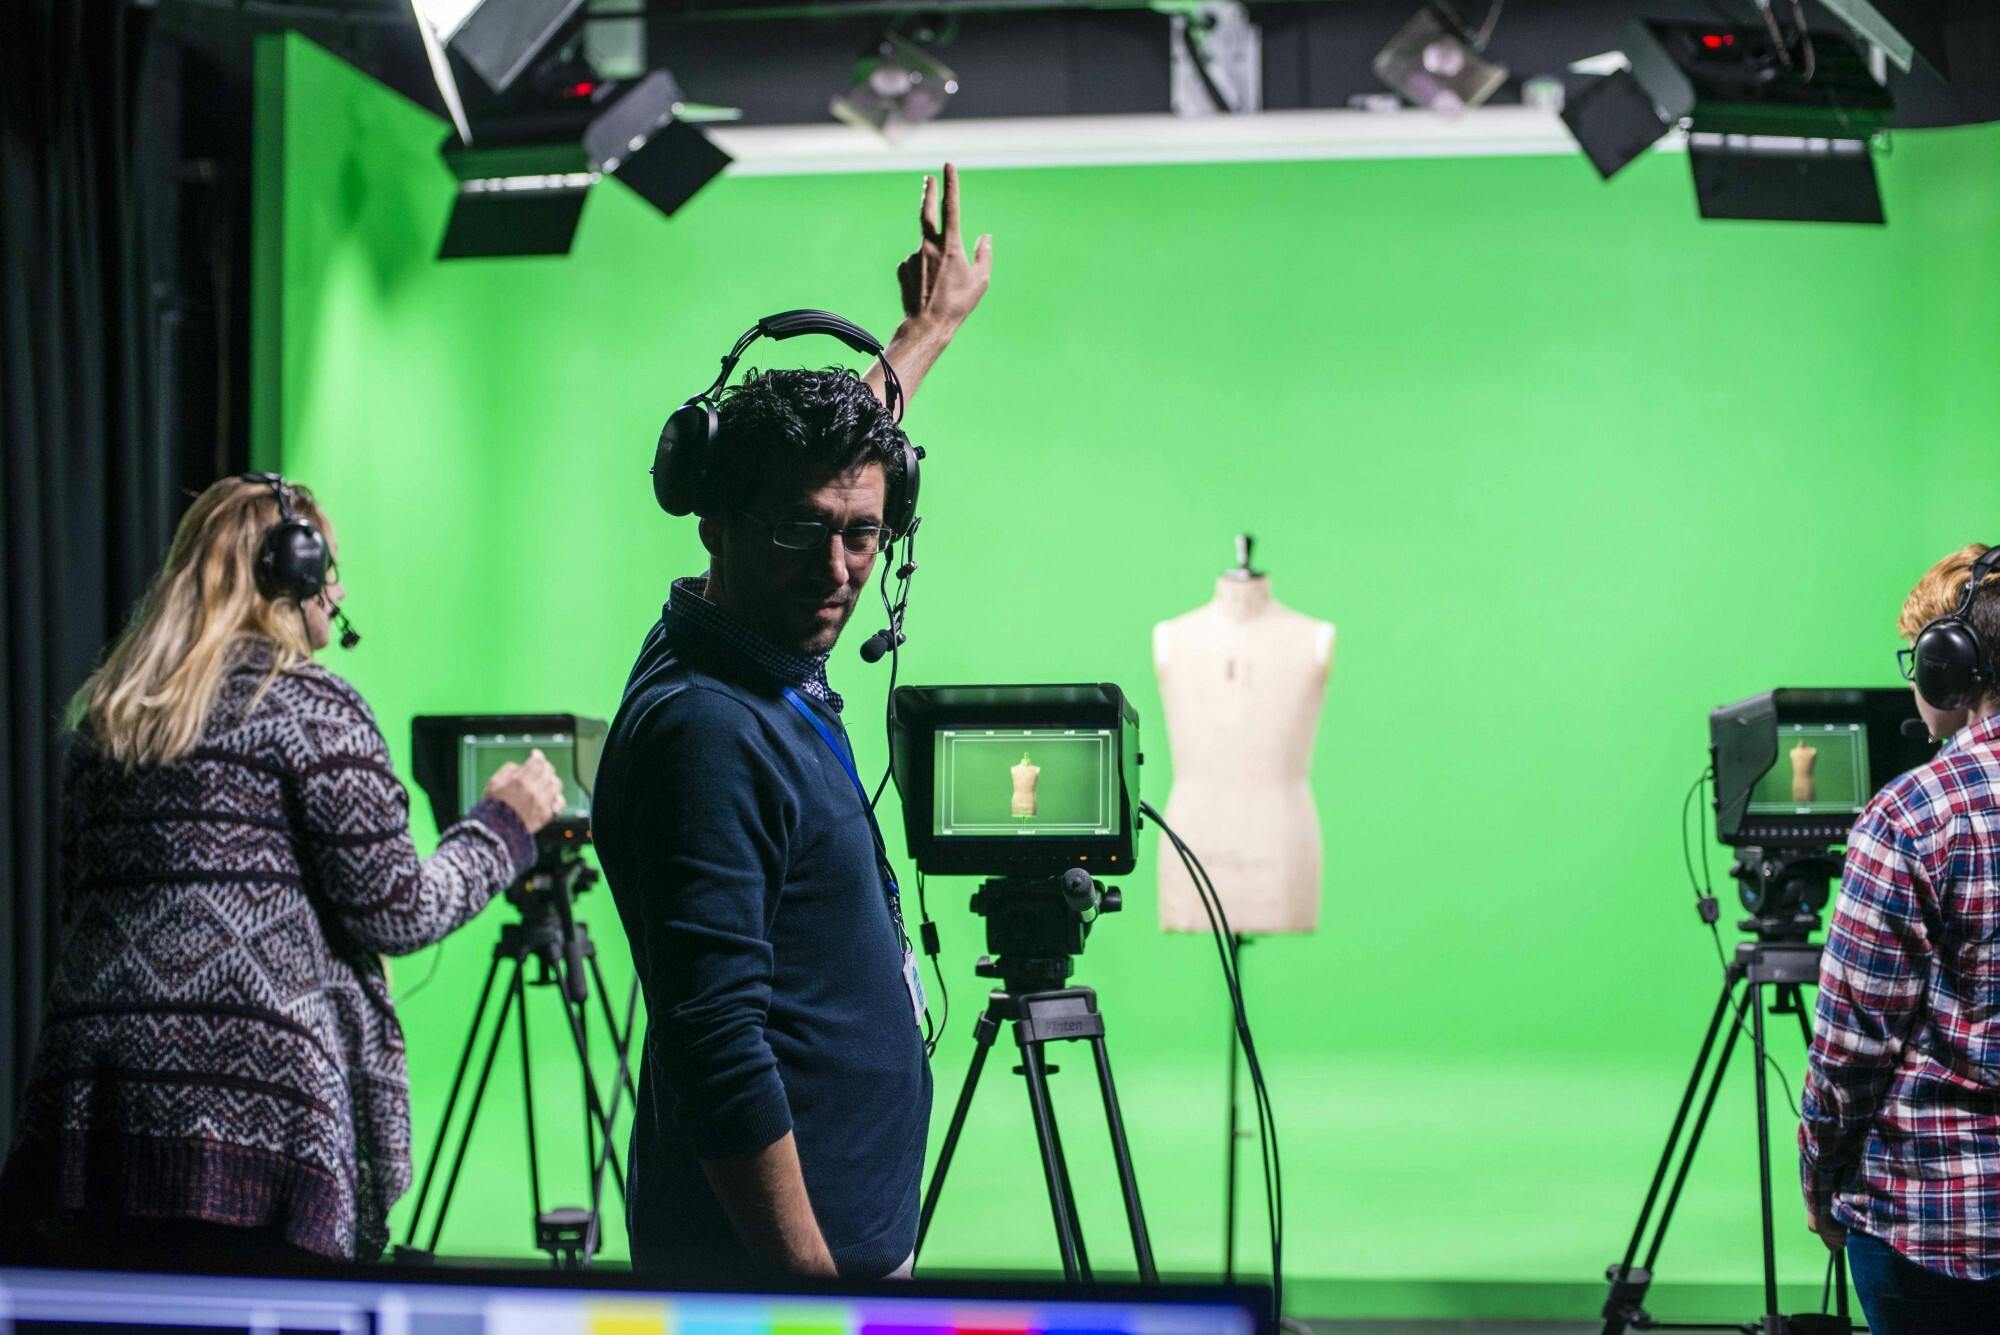 Students have access to our dedicated Film Studios and equipment